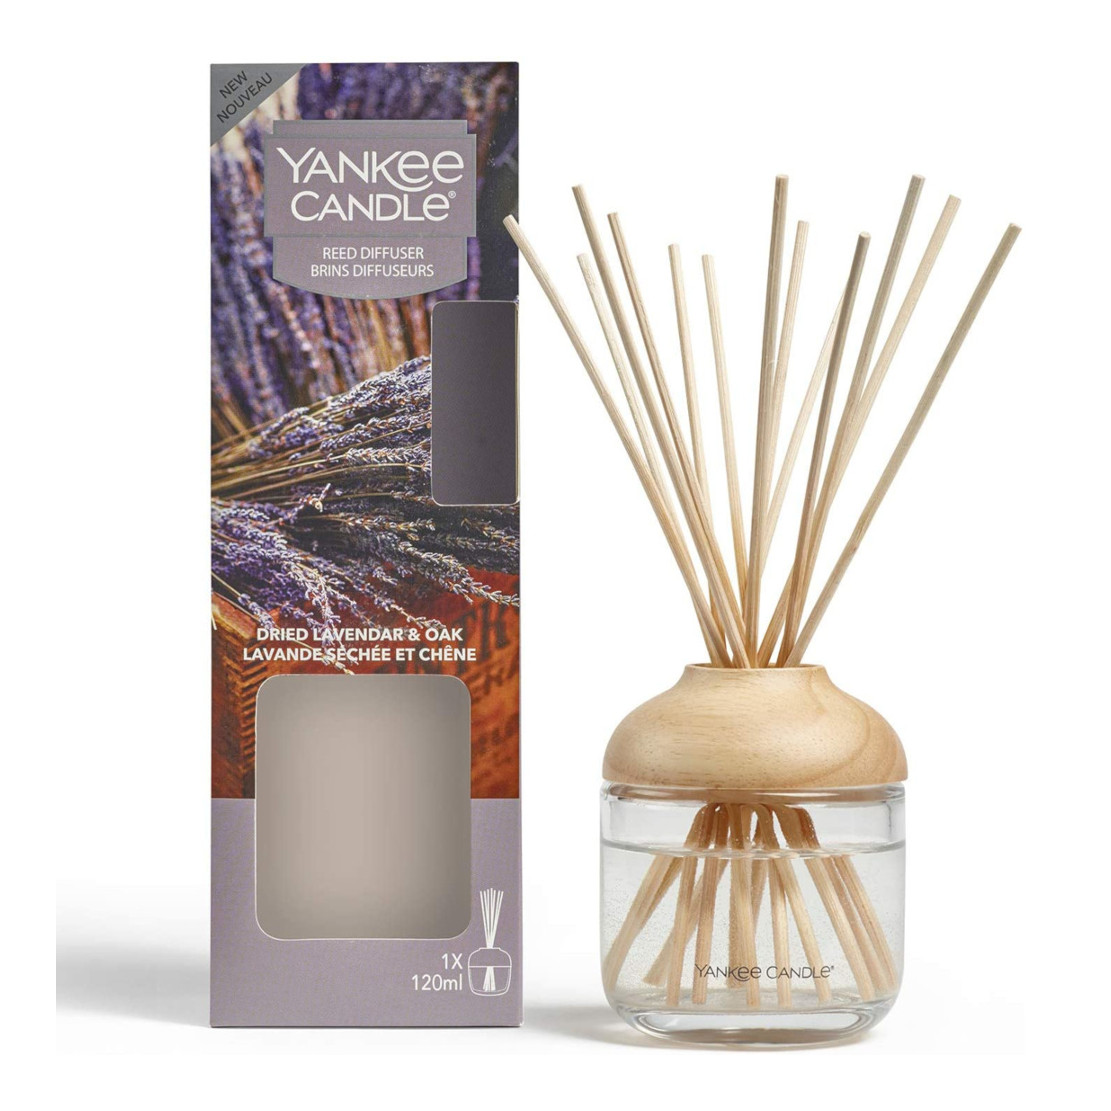 Yankee Candle Dried Lavender & Oak Reed Diffuser